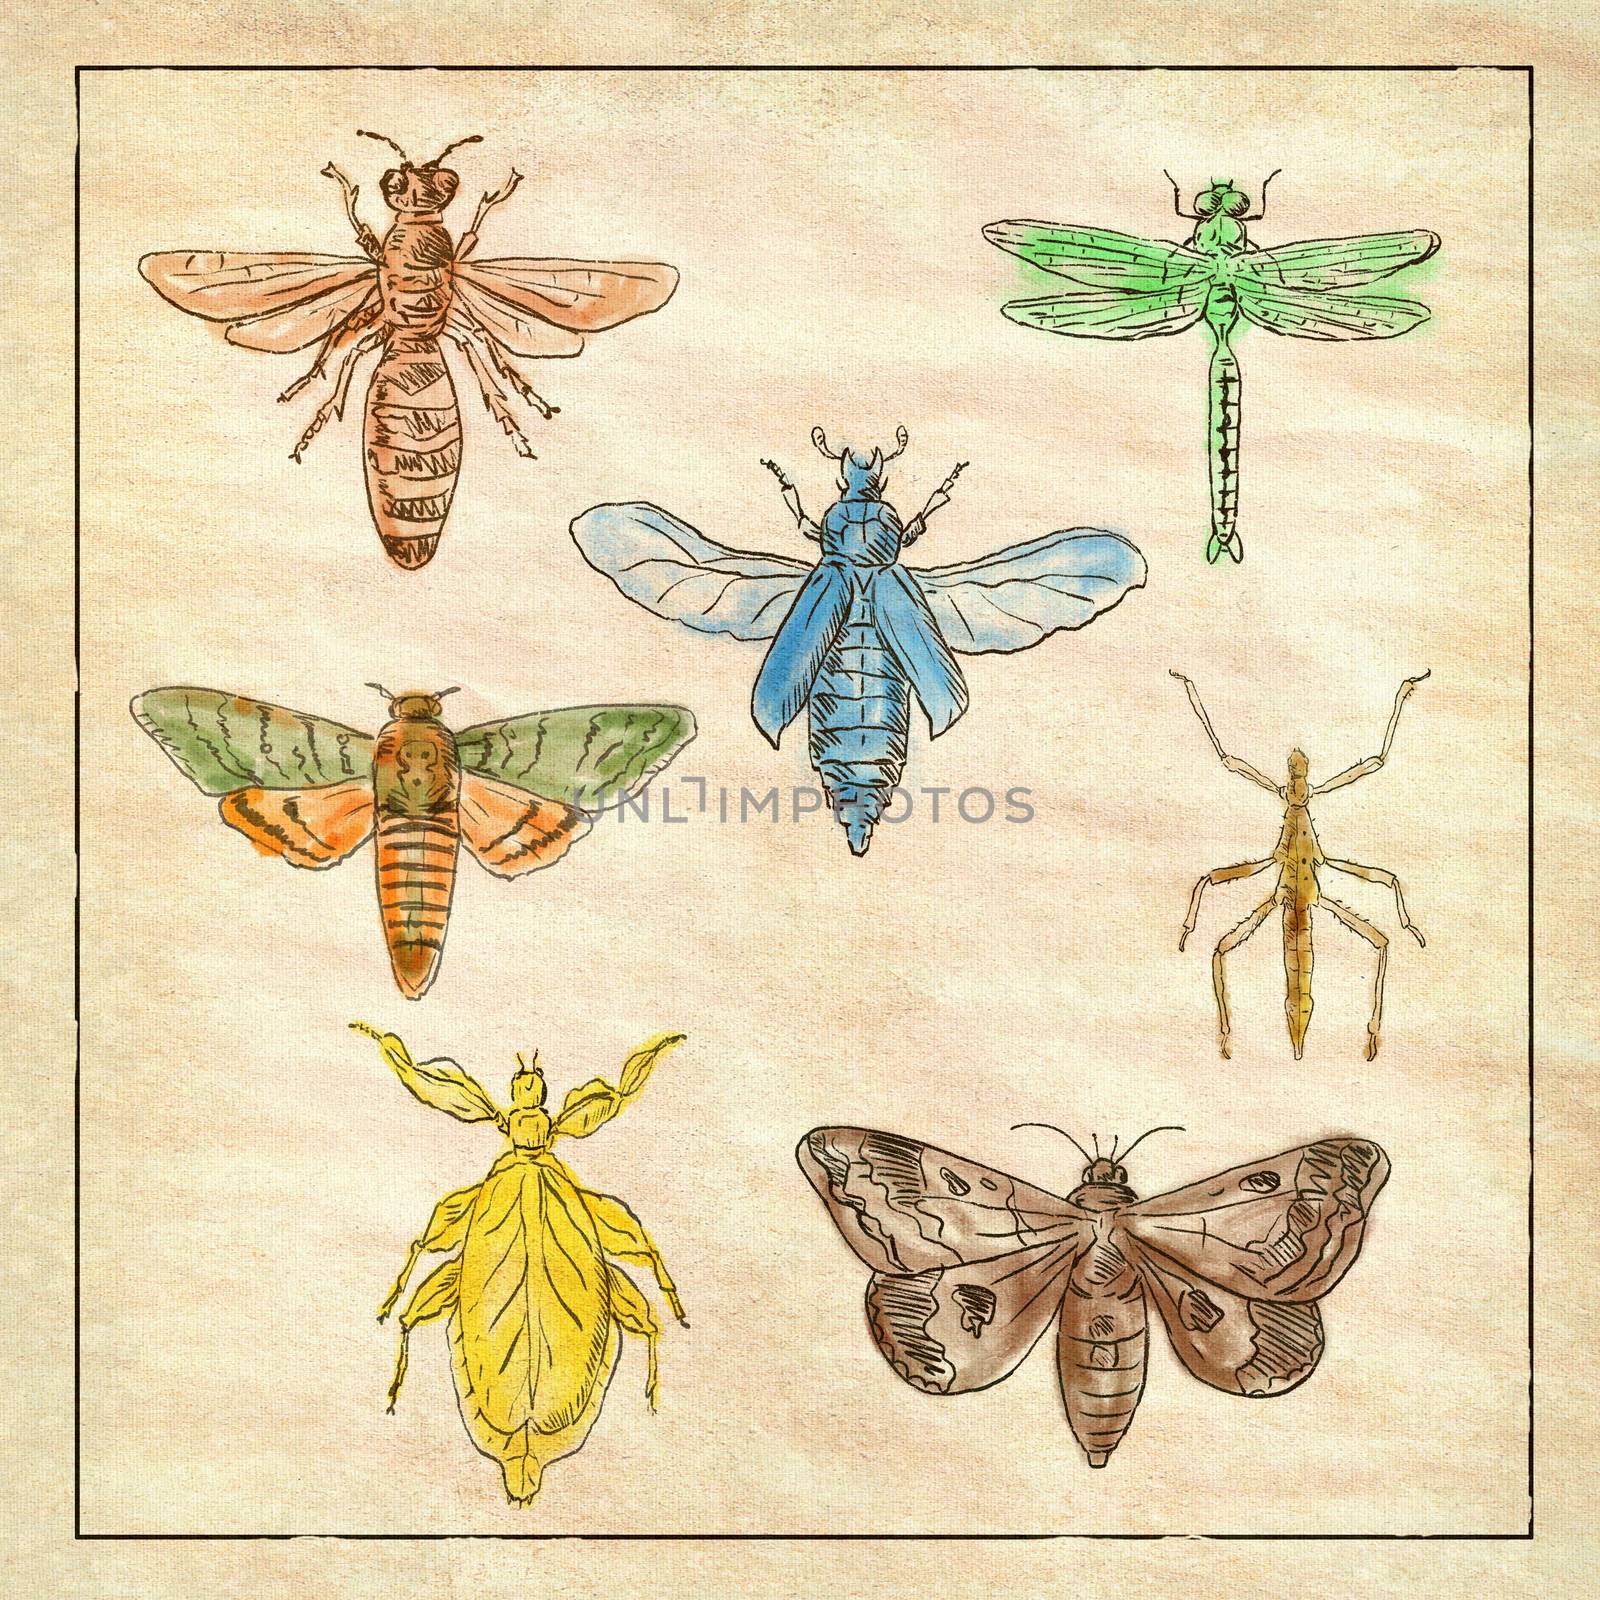 Vintage Moth, Dragonfly, Mantis and Stick Insect Collection on Antique Paper by patrimonio